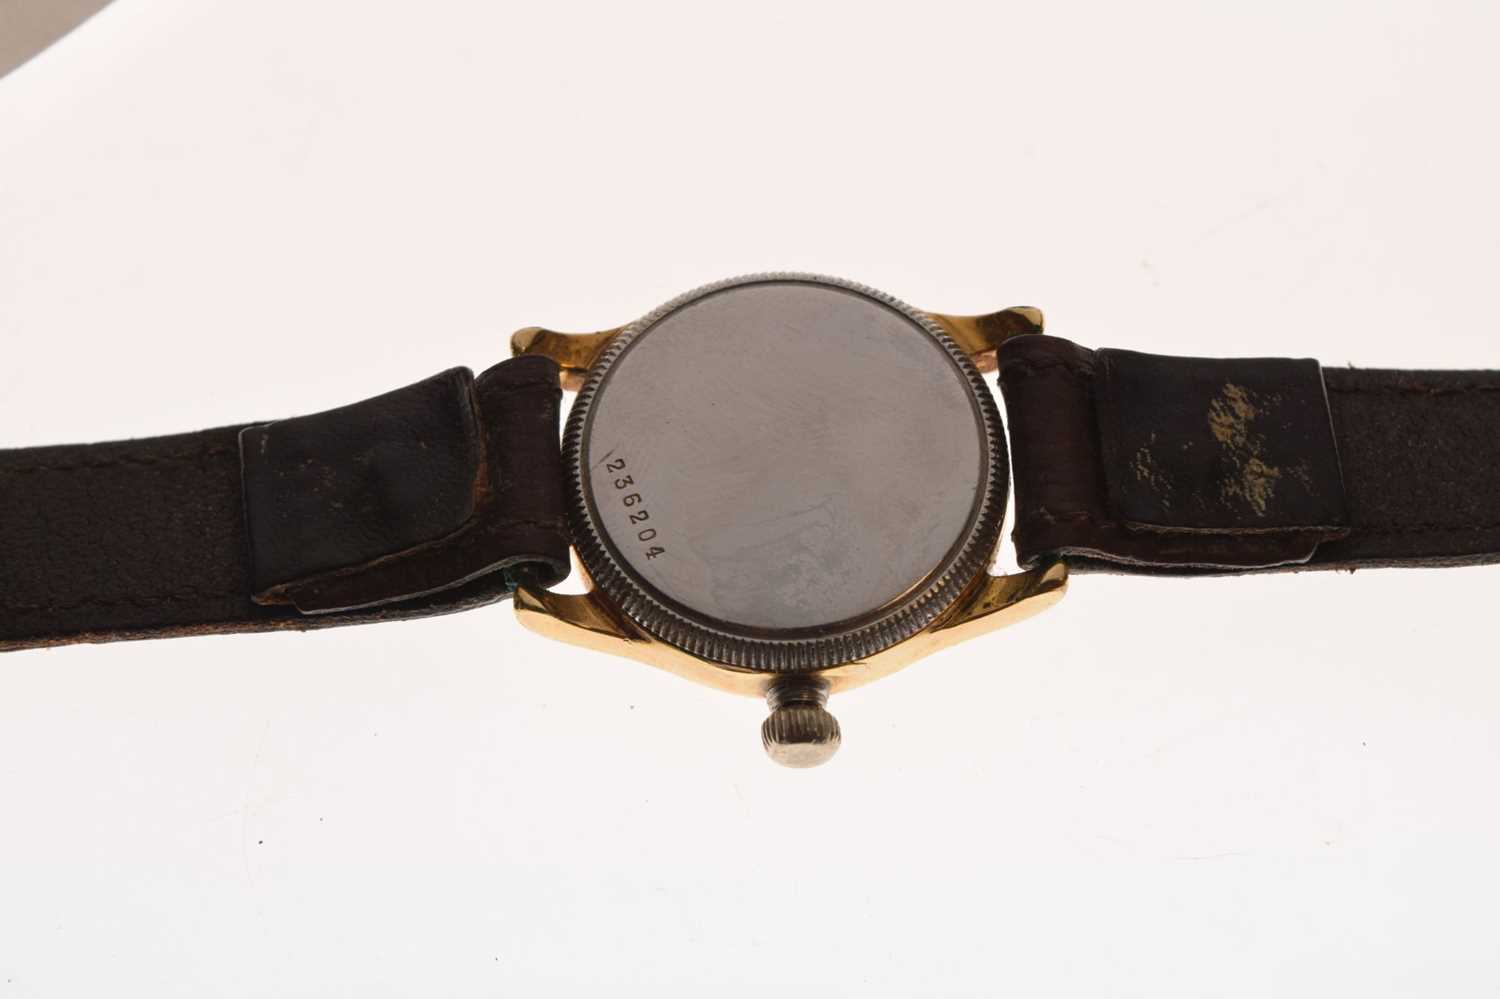 Rolex - 1940s Oyster Recorda manual wind wristwatch - Image 4 of 10